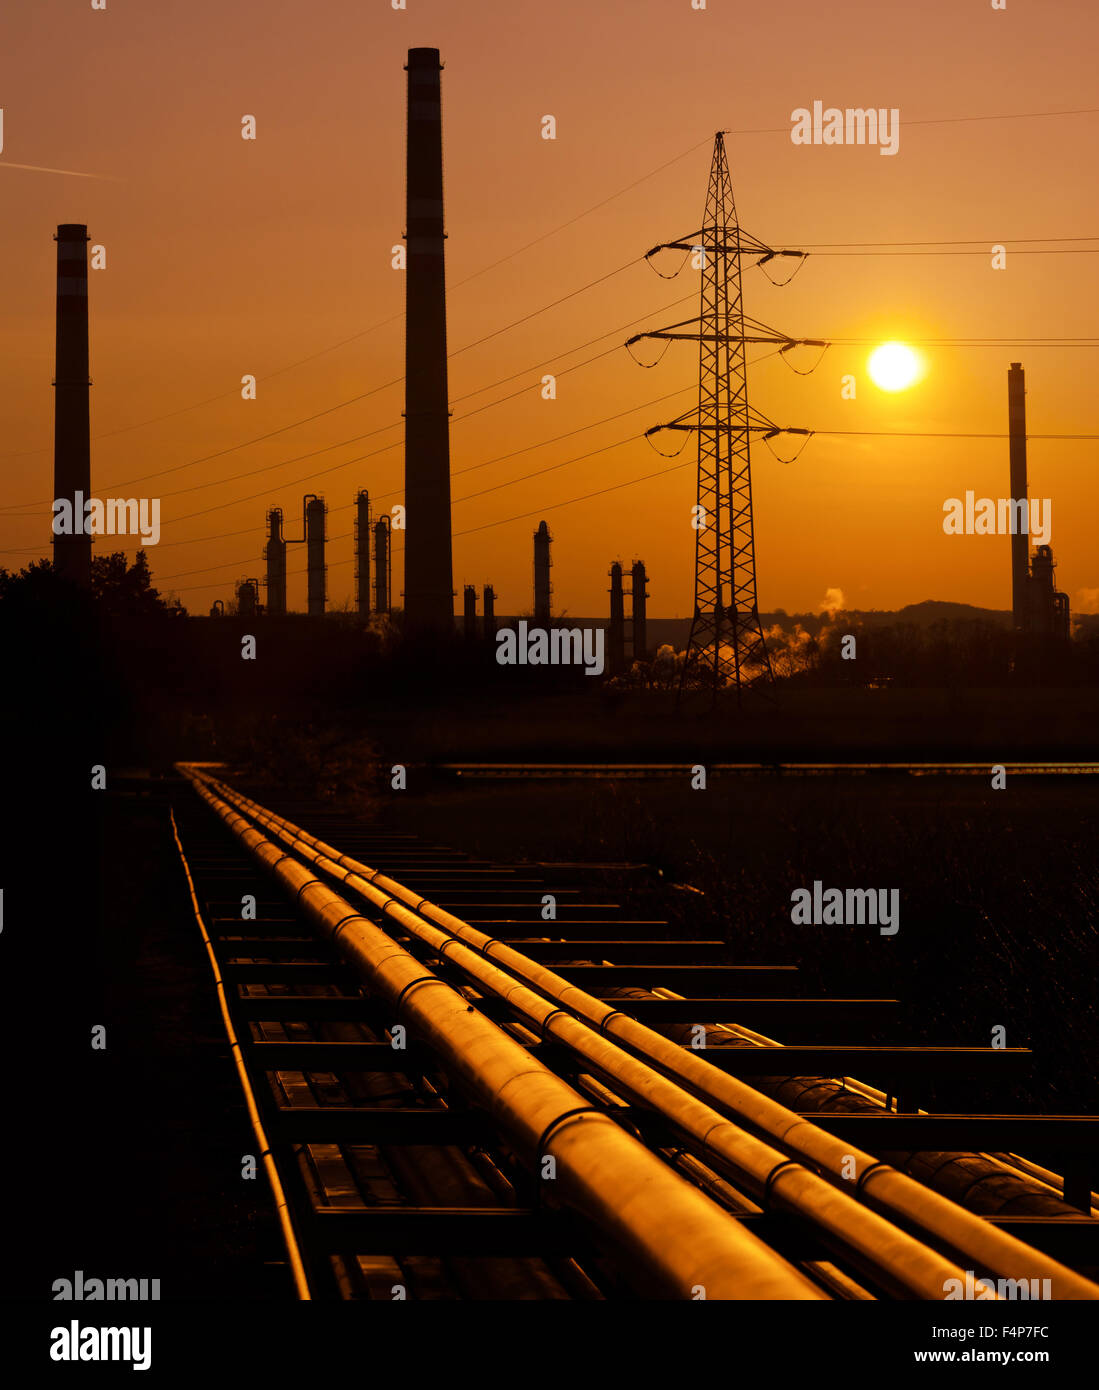 Oil refinery at sunset Stock Photo